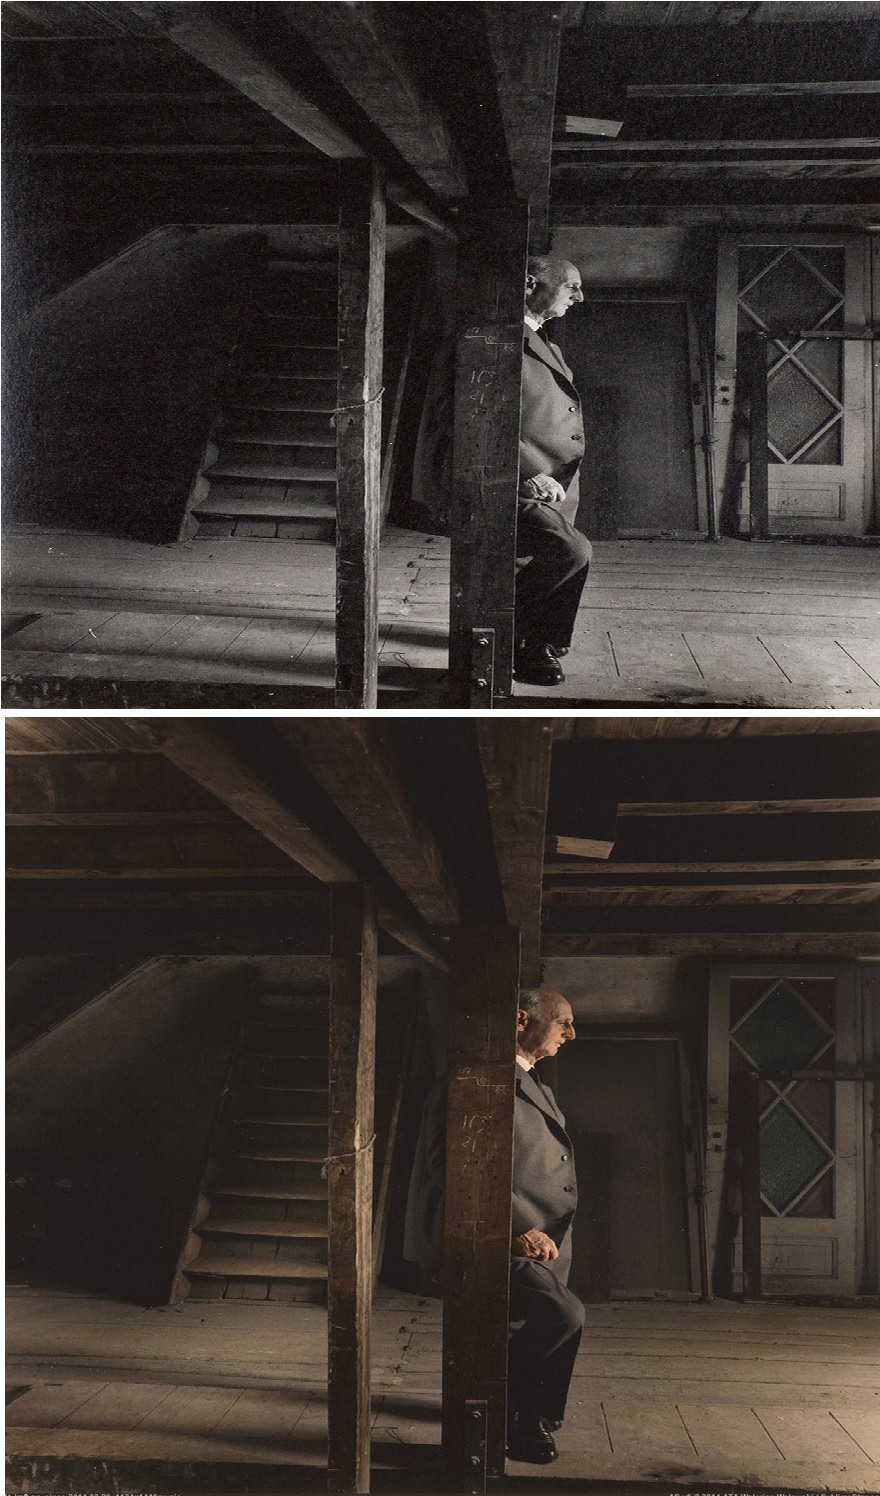 Otto Frank, Anne Frank’s father and the only surviving member of the Frank family revisiting the attic they spent the war in, 3 May 1960